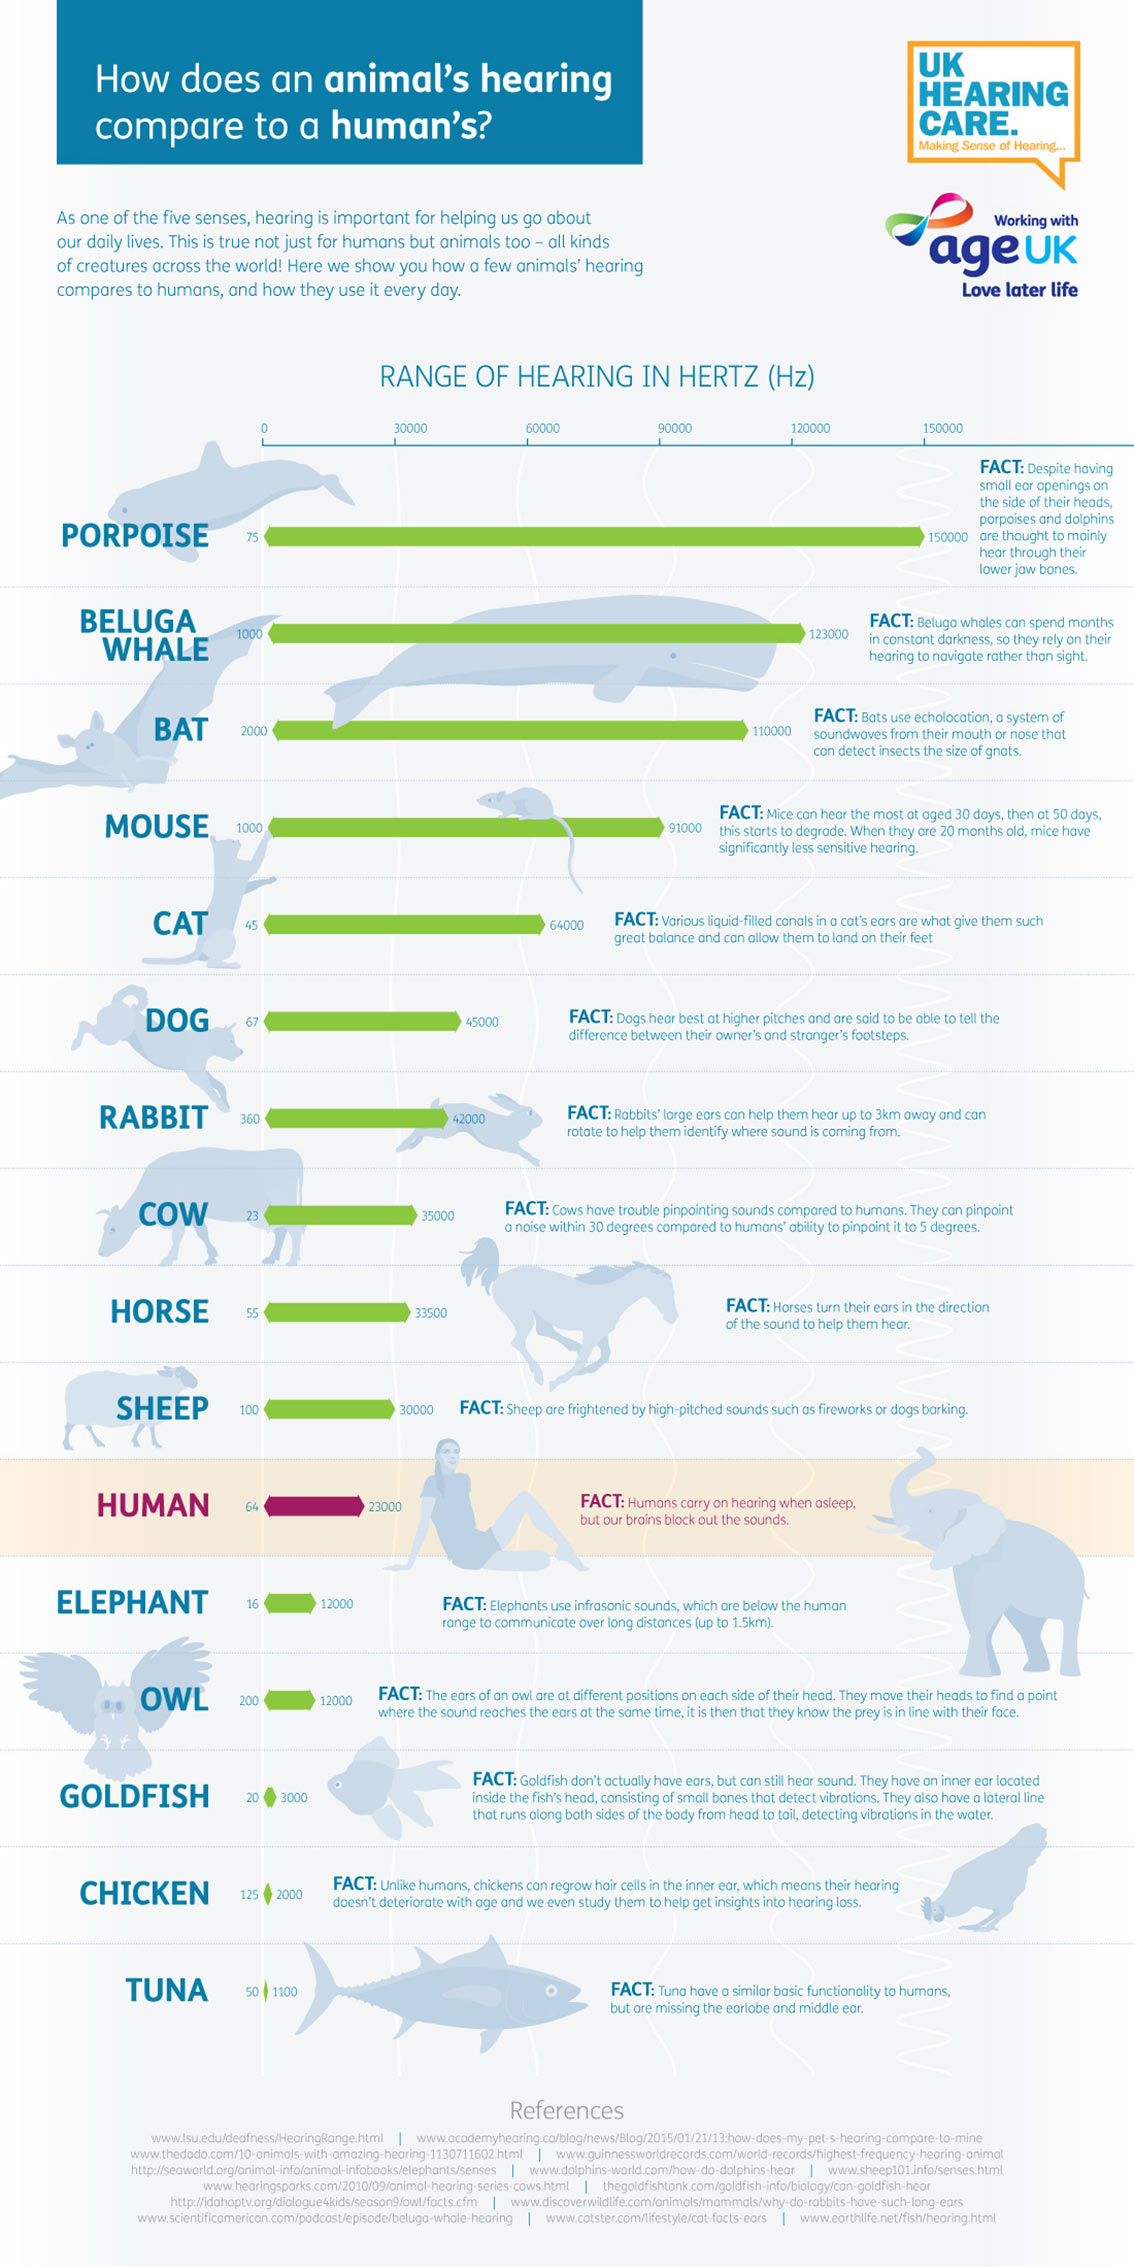 Animal Hearing Ranges Compared to Human [Infographic]